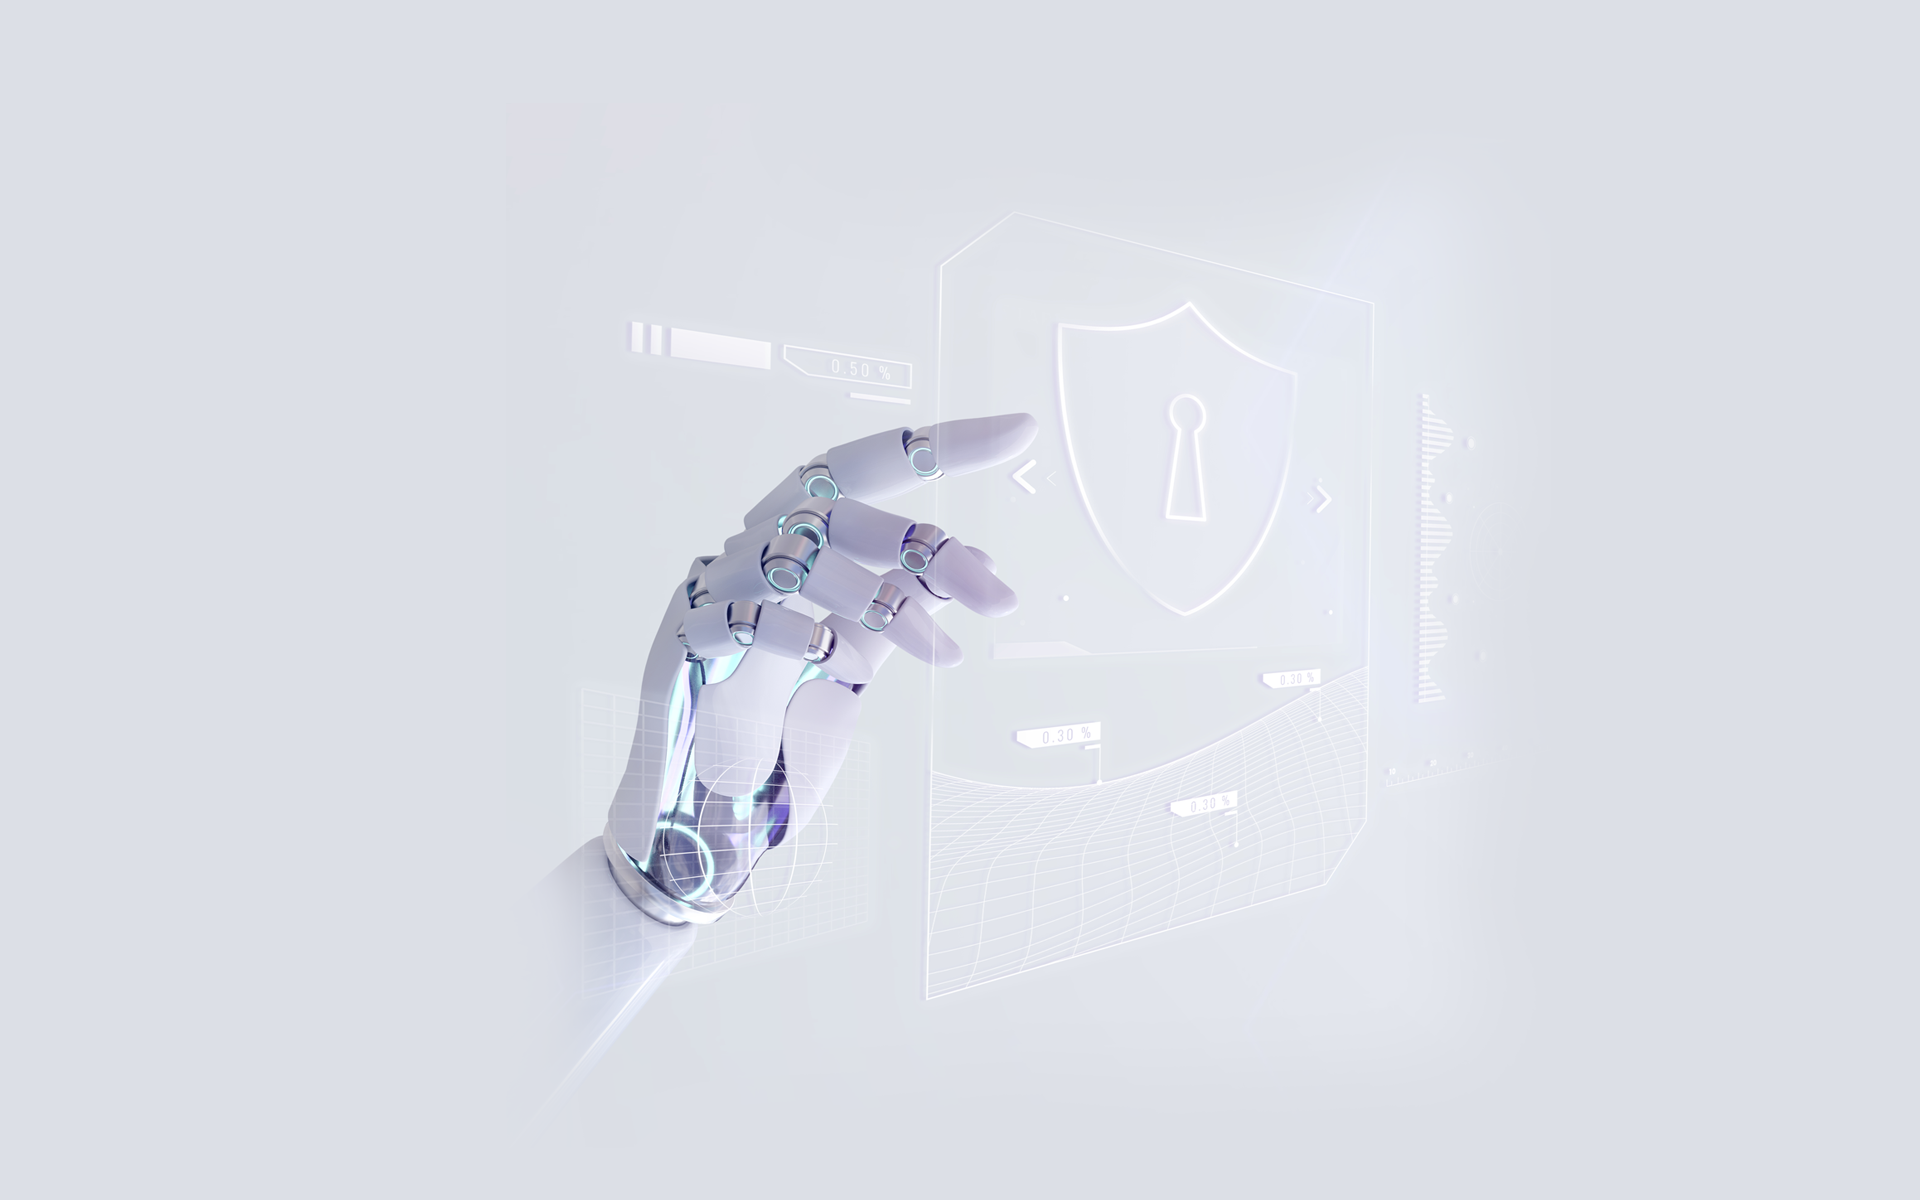 An image of a robot hand pointing at a white security icon.